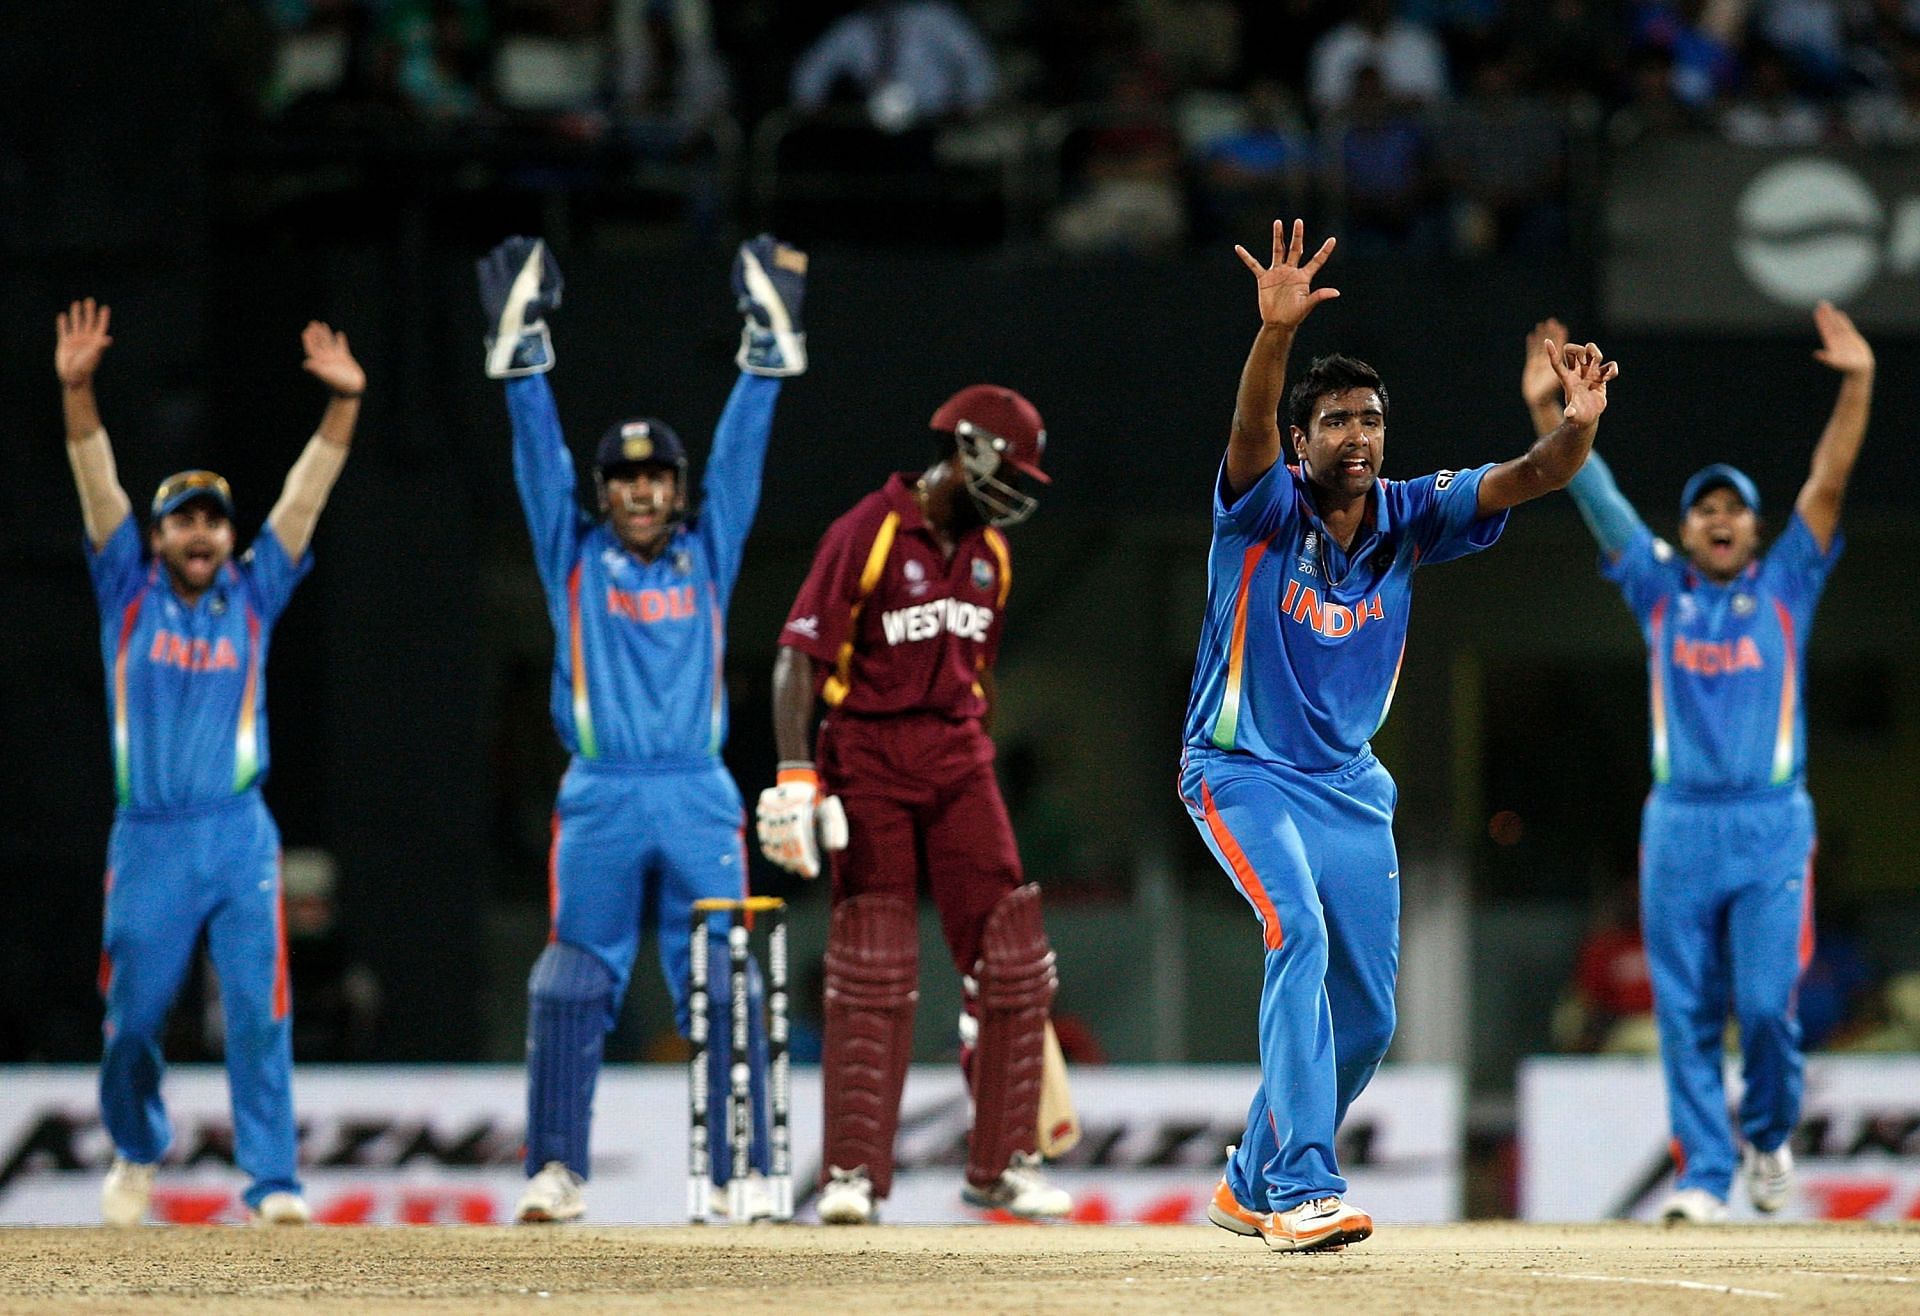 The off-spinner appealing for an lbw during the 2011 World Cup. Pic: Getty Images